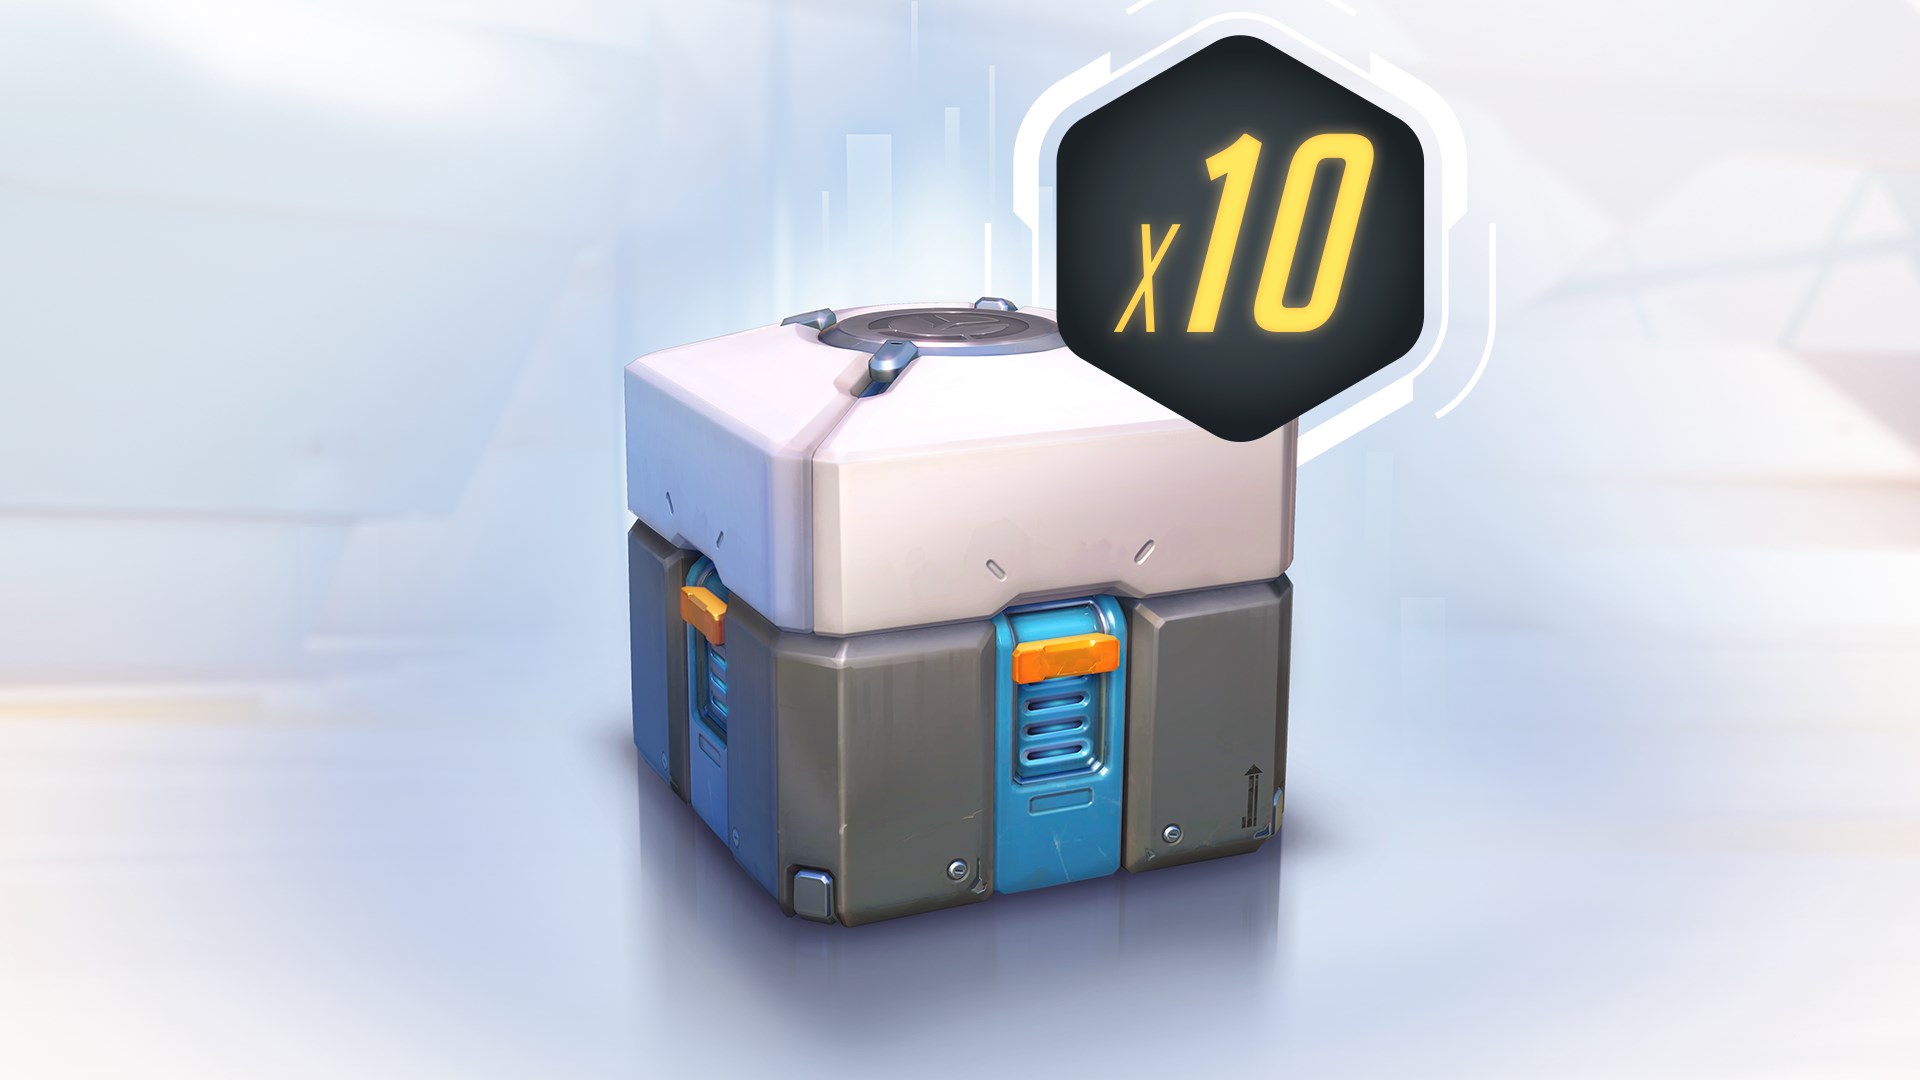 Overwatch® - 10 Loot Boxes